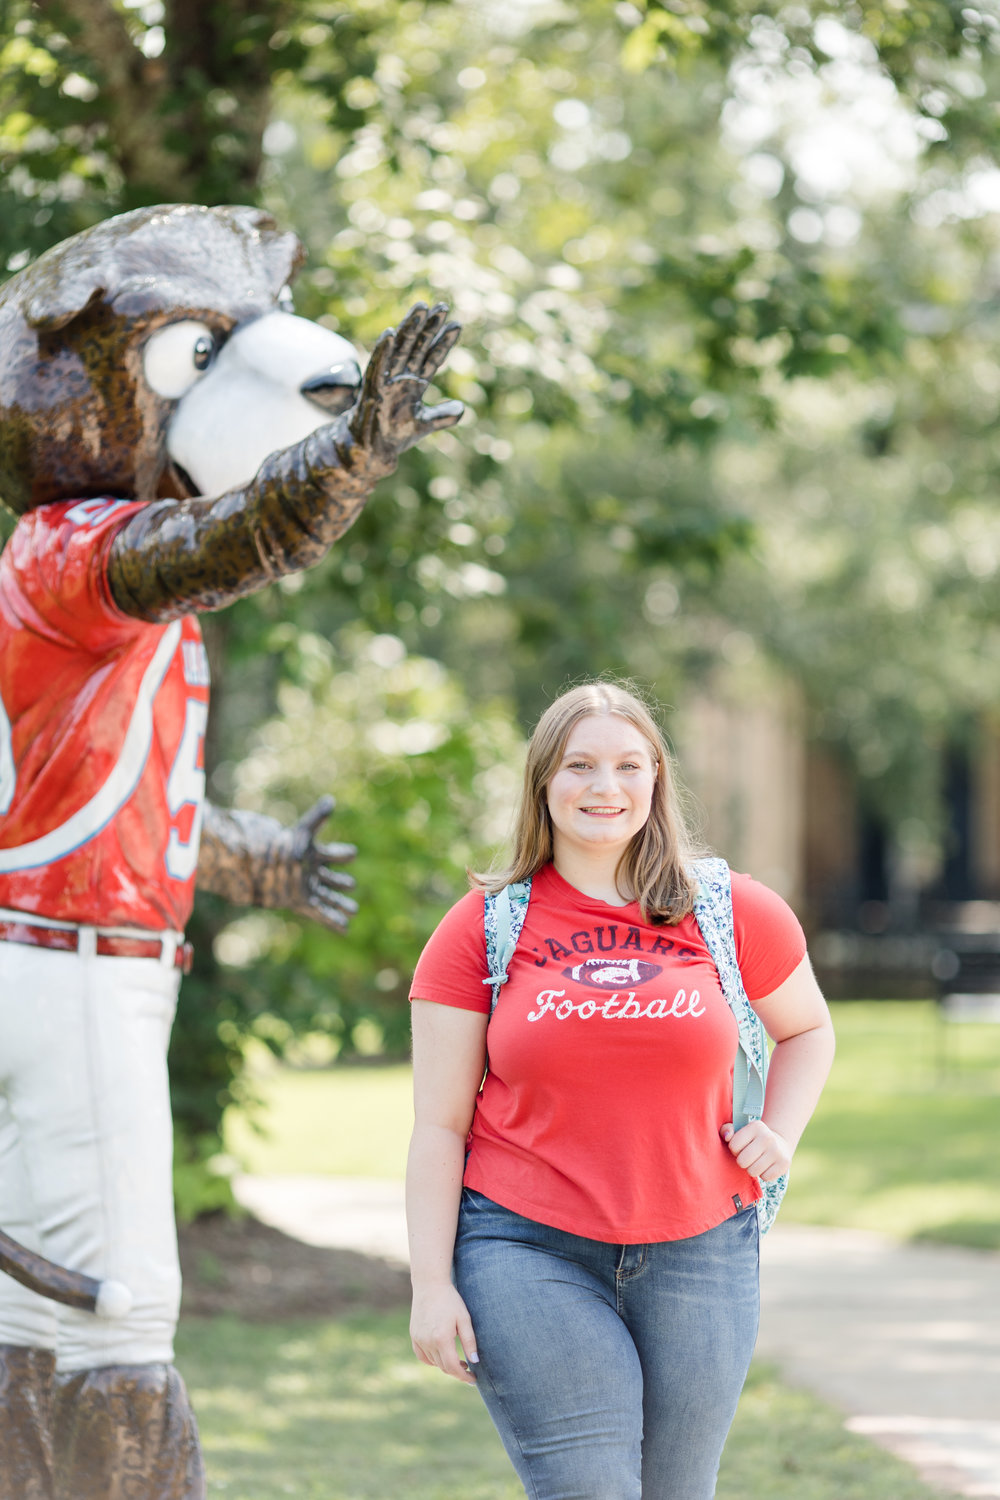 Chloe Giardina, a graduate of Robertsdale High School and an undergraduate student majoring in elementary education at the University of South Alabama, is the first recipient of the William “Willie” Peck Memorial Scholarship.